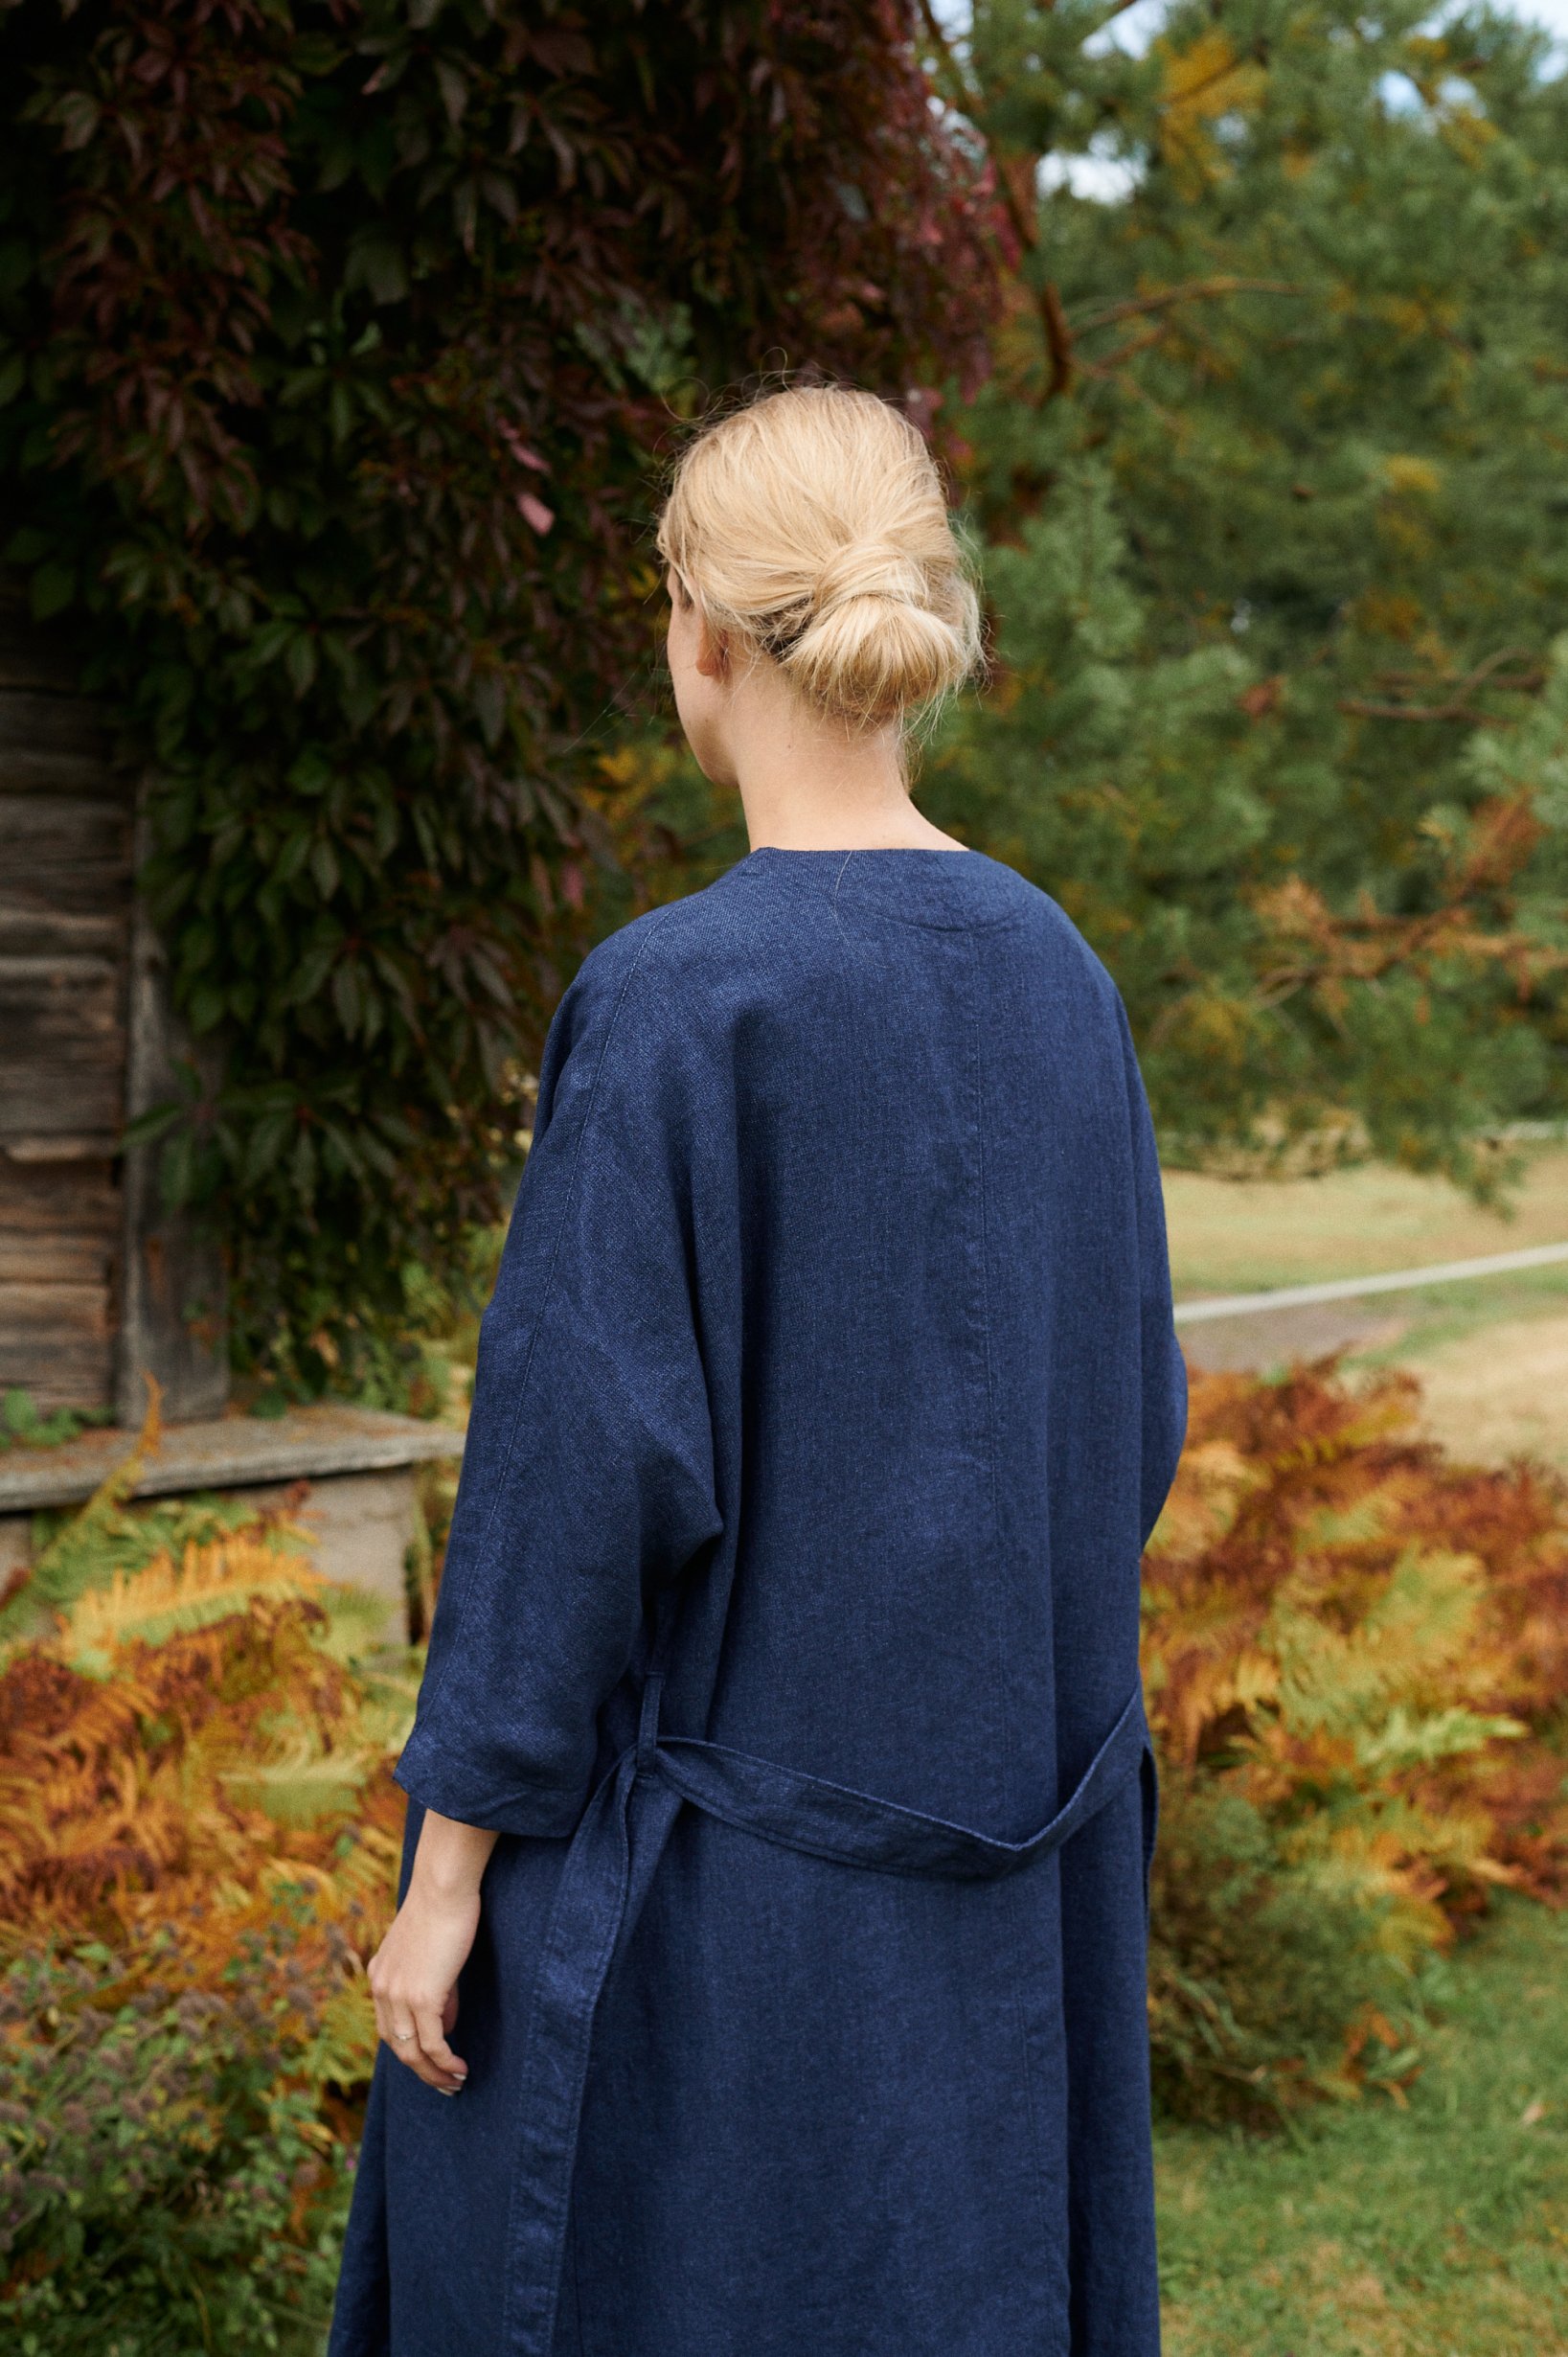 Back view of a woman in a navy blue linen wool blend jacket